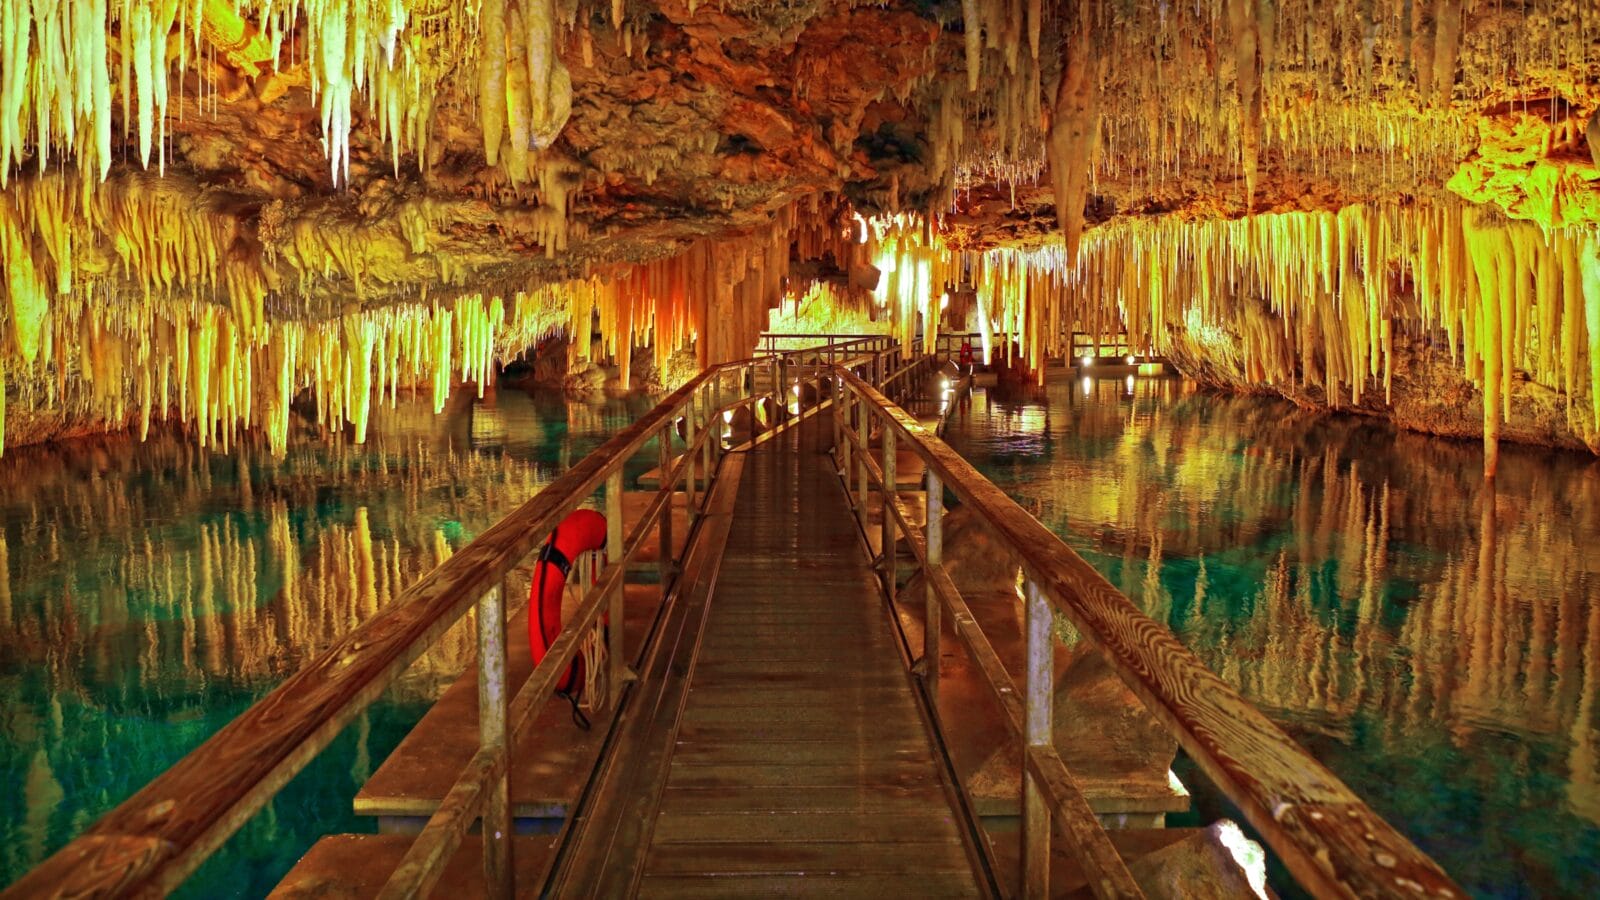 <p>Bermuda’s Crystal Caves and Fantasy Caves duo is a must-see destination for all cave lovers and visitors of the British island territory.</p><p>The crystal caves are famous for their floating pontoons, which lead you through the subterranean area under thousands of spectacular stalactites resembling chandeliers. While strolling through the cave, you’ll be surrounded by a crystal-clear underground lake. On the other hand, the nearby Fantasy Cave is a hidden gem comprising stunning formations and waterfalls frozen through time. The cave also offers a close look at its deep pools and walls glazed with mineral deposits.</p>